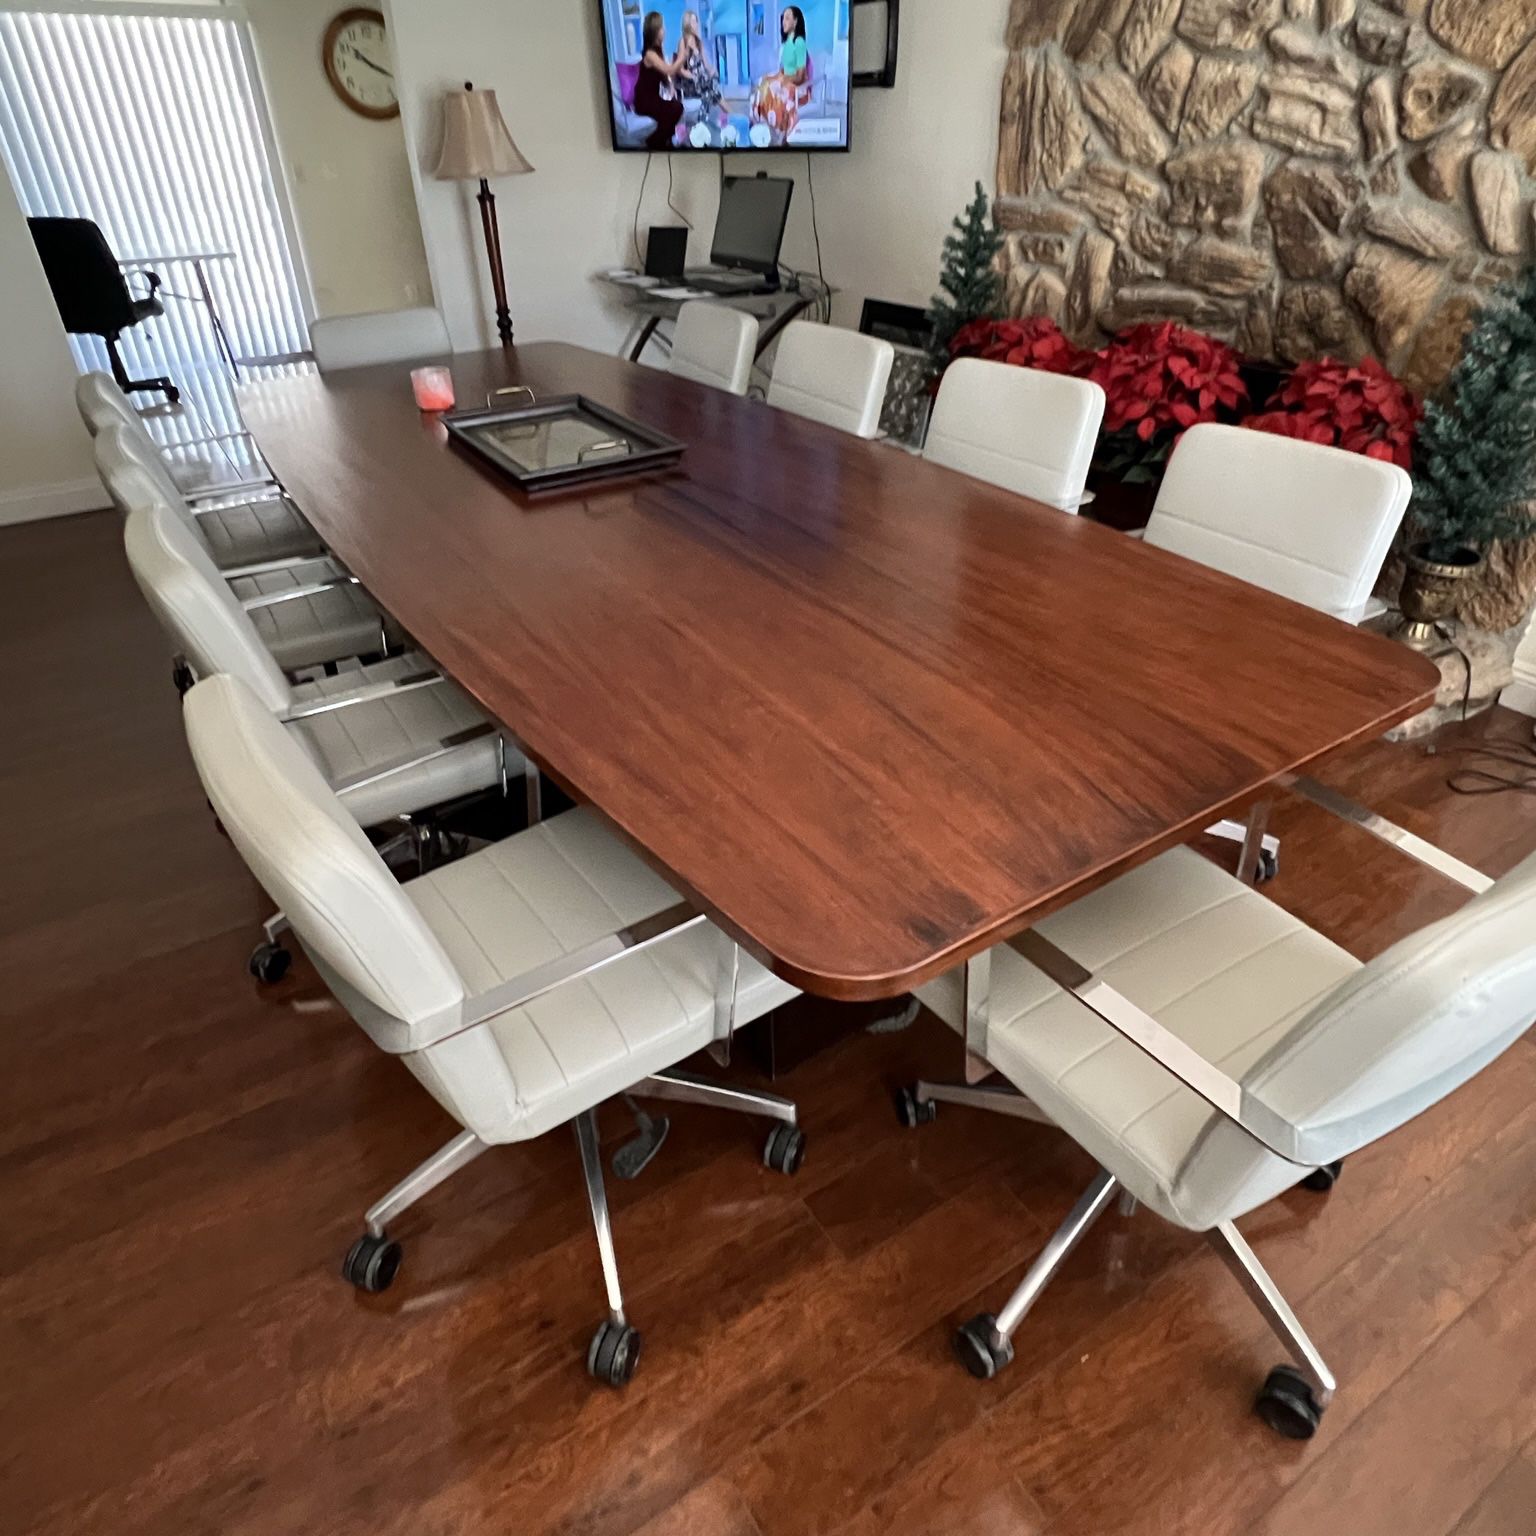 Conference Table For Sale. 10 Feet x 4 Feet x 29 Height